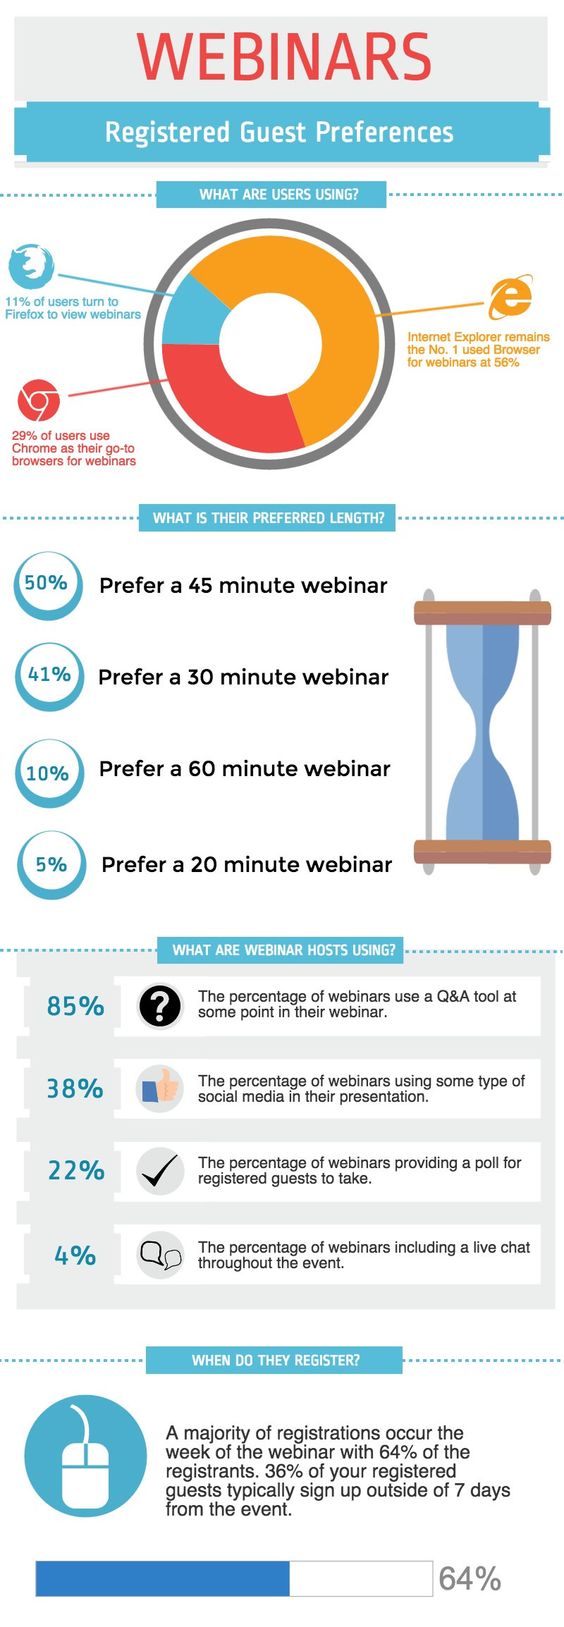 Webinars: What People Want (Infographic)